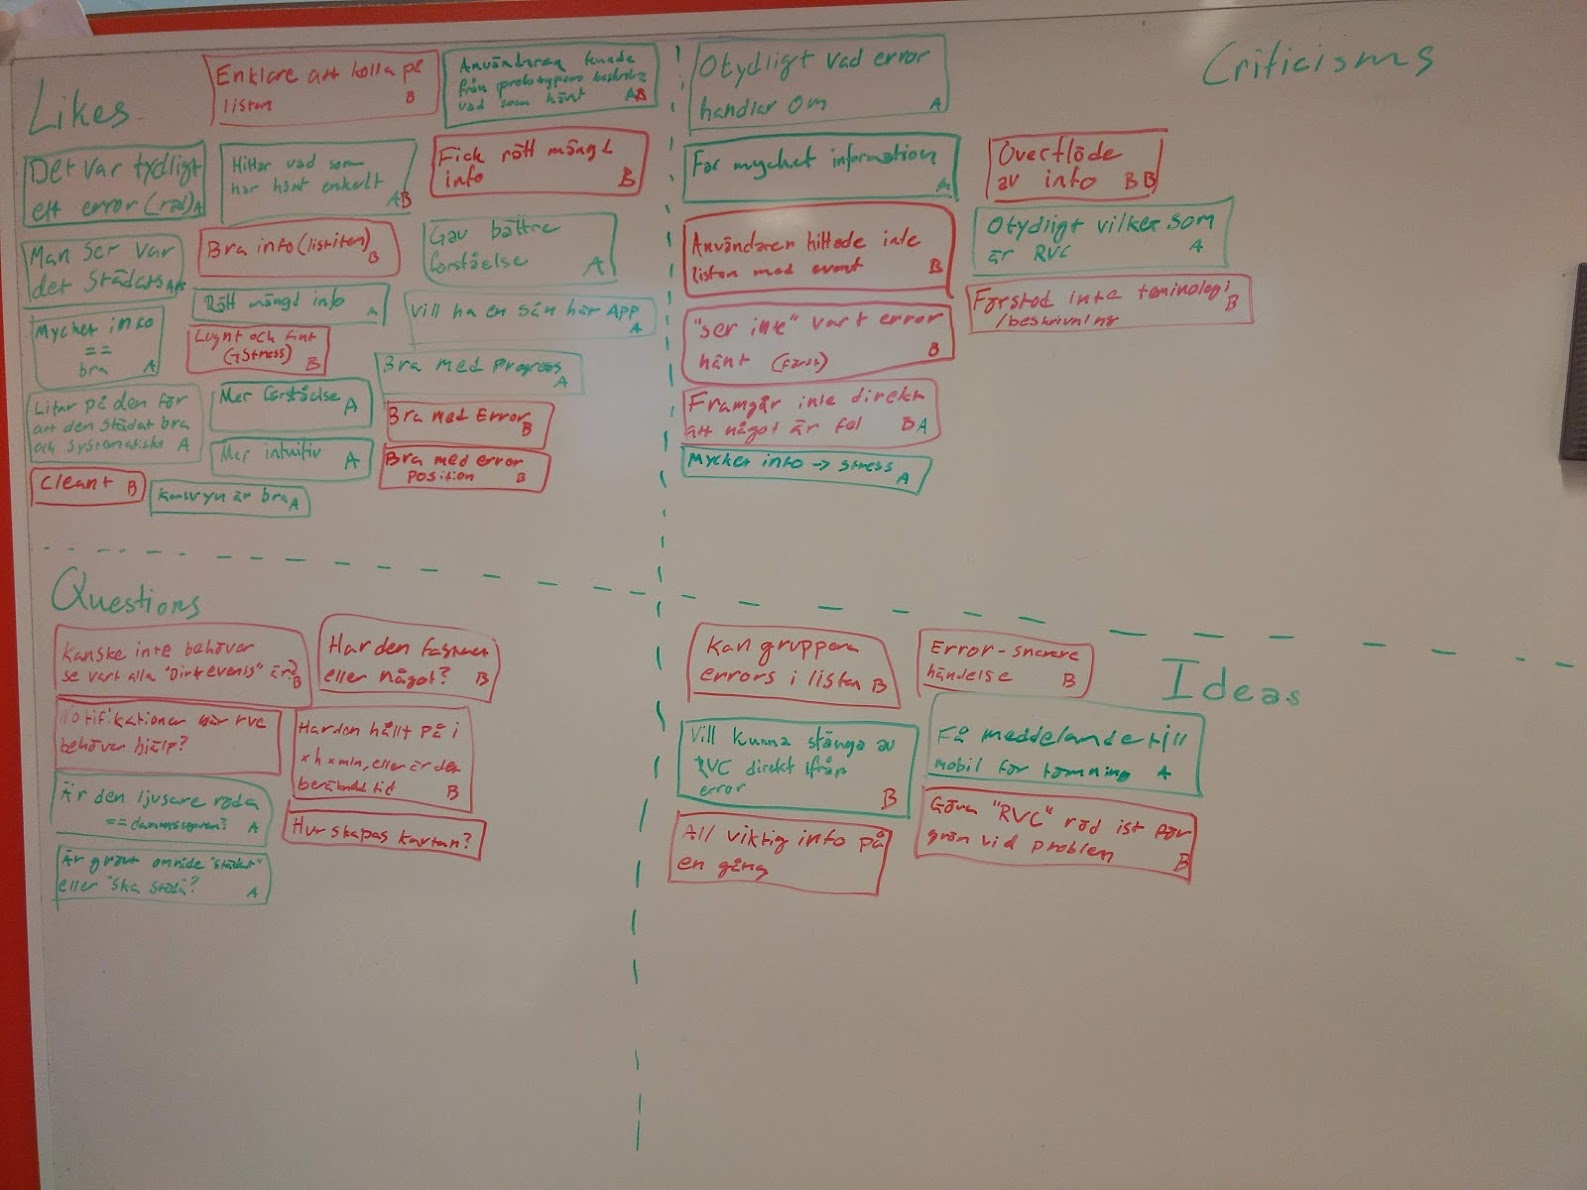 A photo of a whiteboard displaying observations from the user tests.